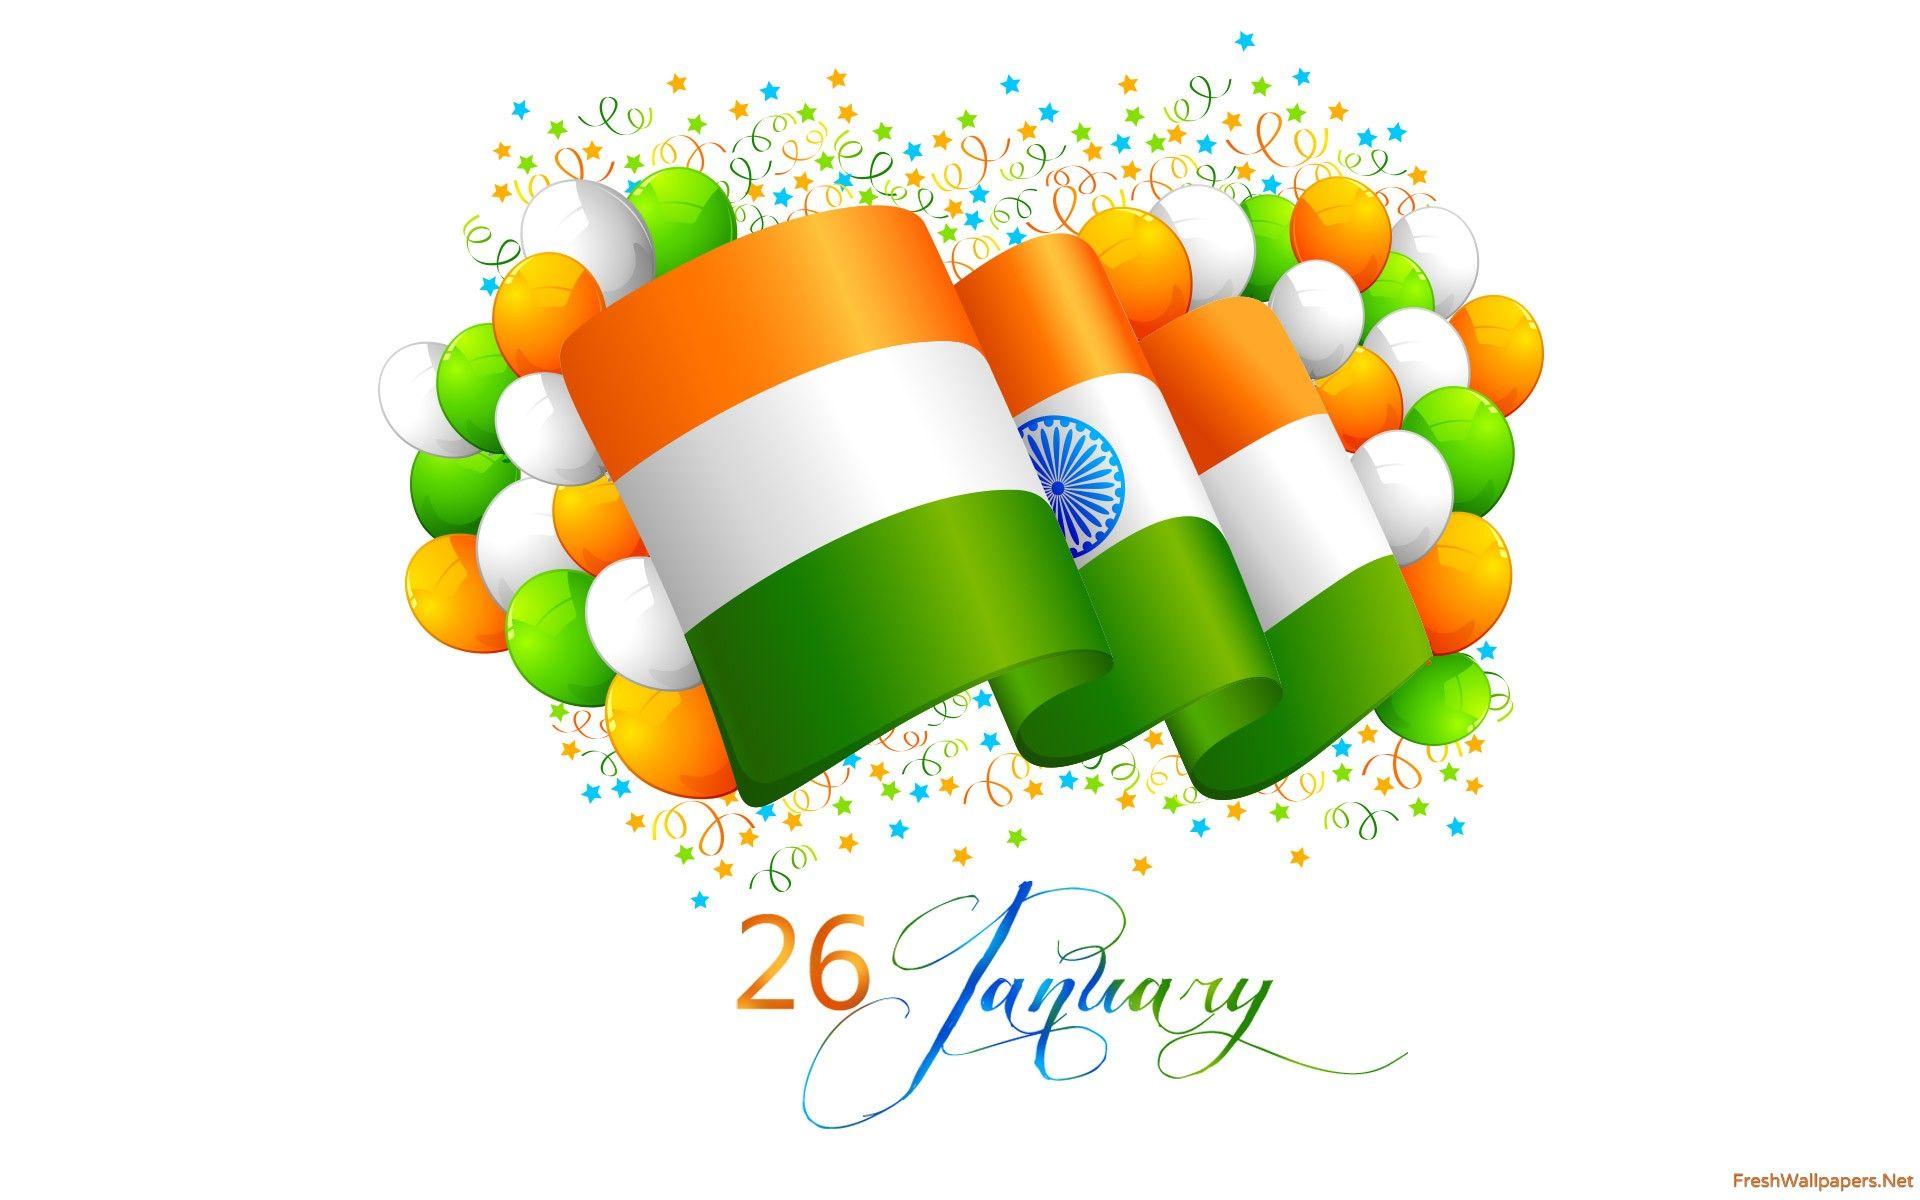 Indian Flag Mobile Wallpapers - Top Free Indian Flag Mobile Backgrounds -  WallpaperAccess